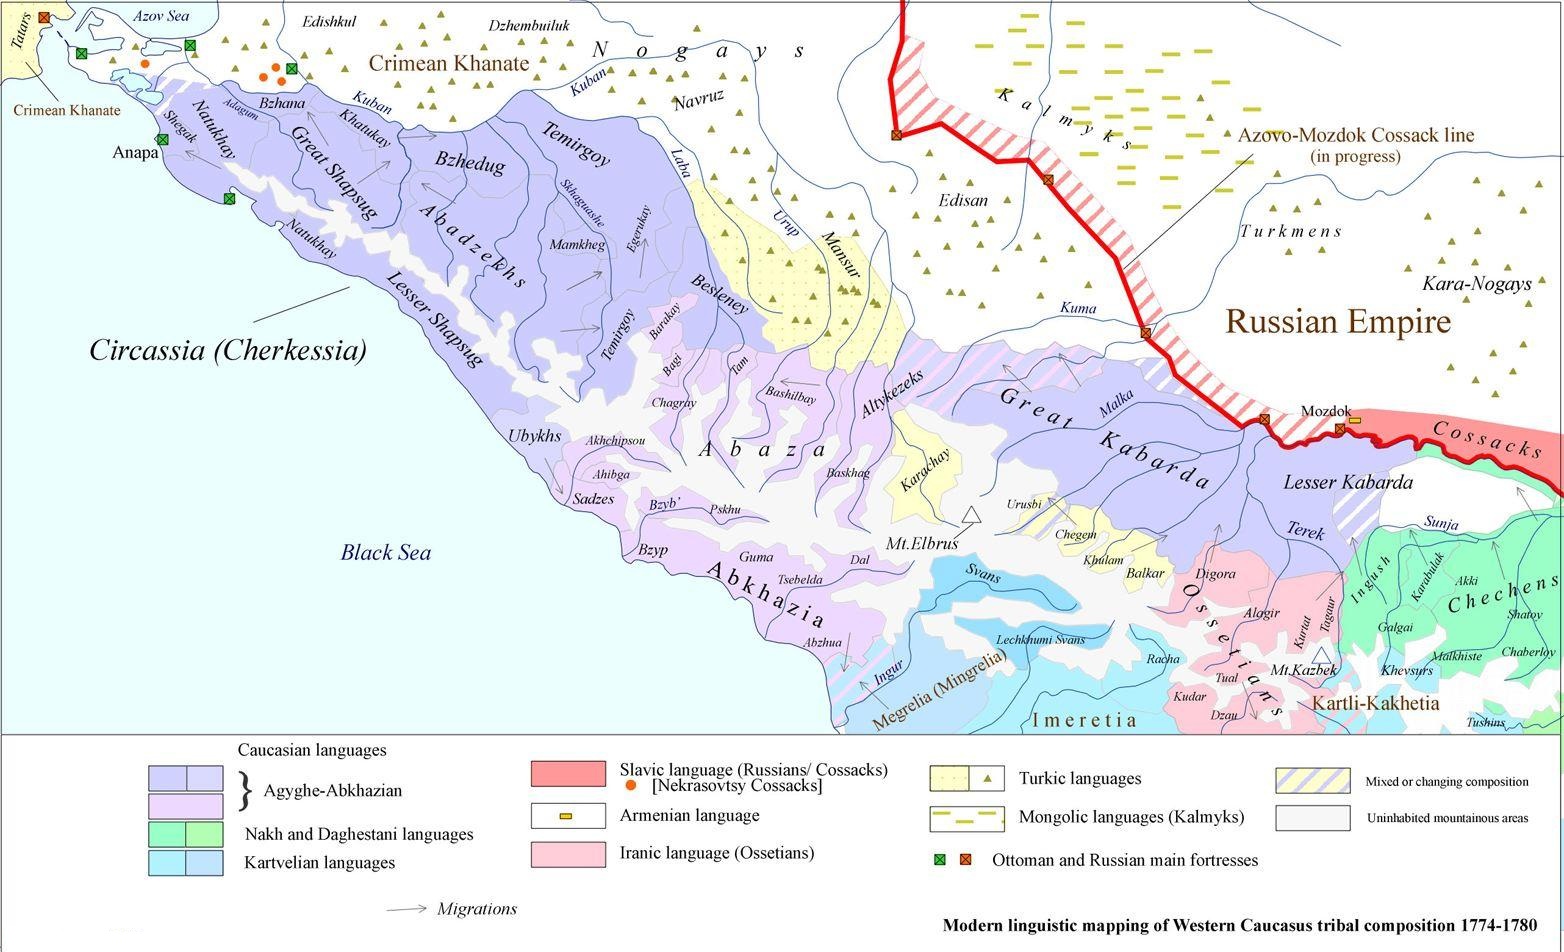 Modern linguistic mapping of Western Caucasus tribal composition 1774-1780 © Artur Tsutsiev